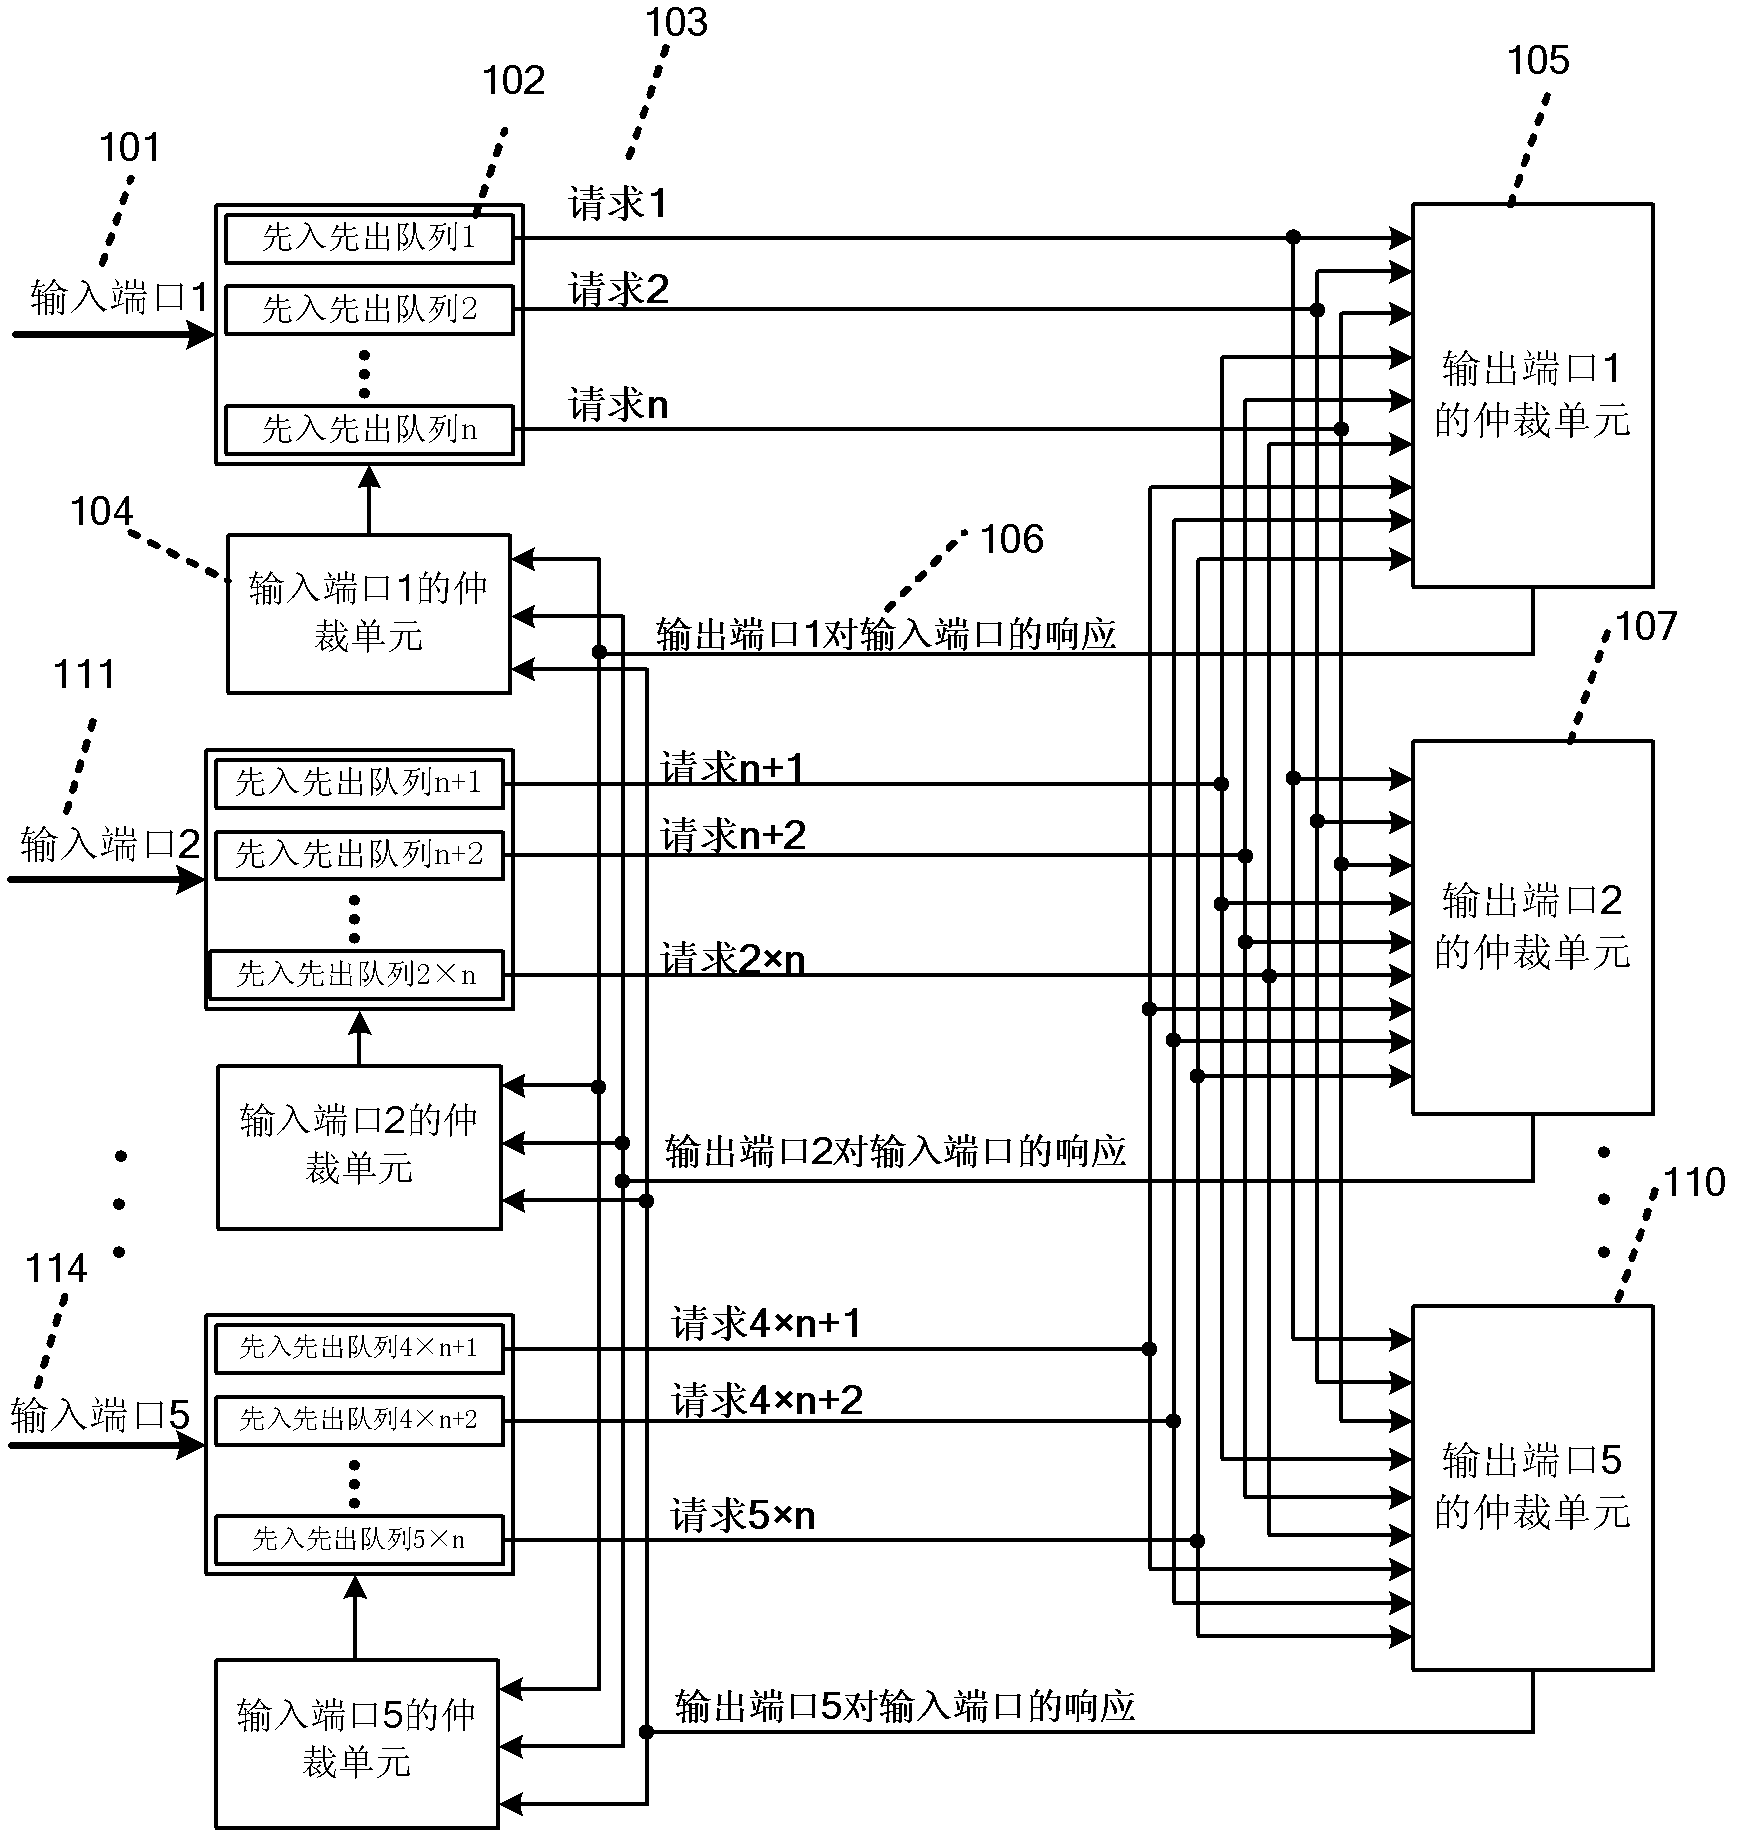 Scheduling method of network-on-chip router based on network information